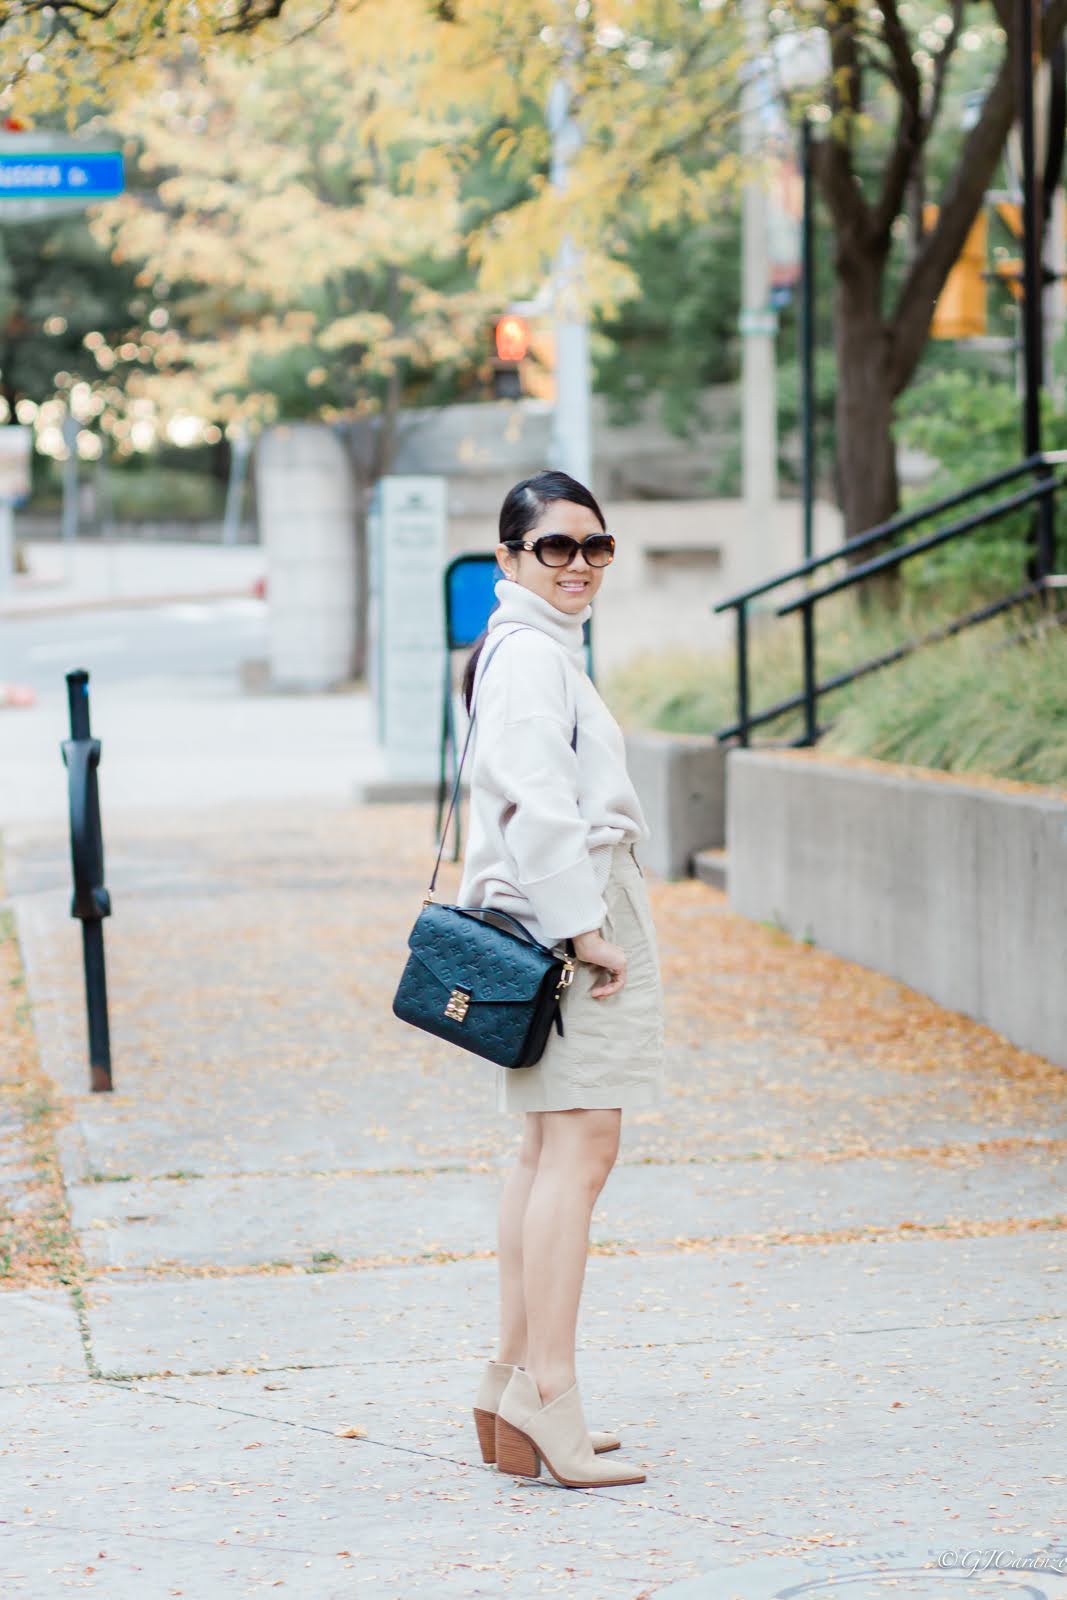 H&M Boxy Sweater | Louis Vuitton Pochette Metis in Black in Empreinte Leather | Vince Camuto Ankle Boots | Gucci Sunglasses | Petite | Linen Shorts | Neutral Fall Outfit